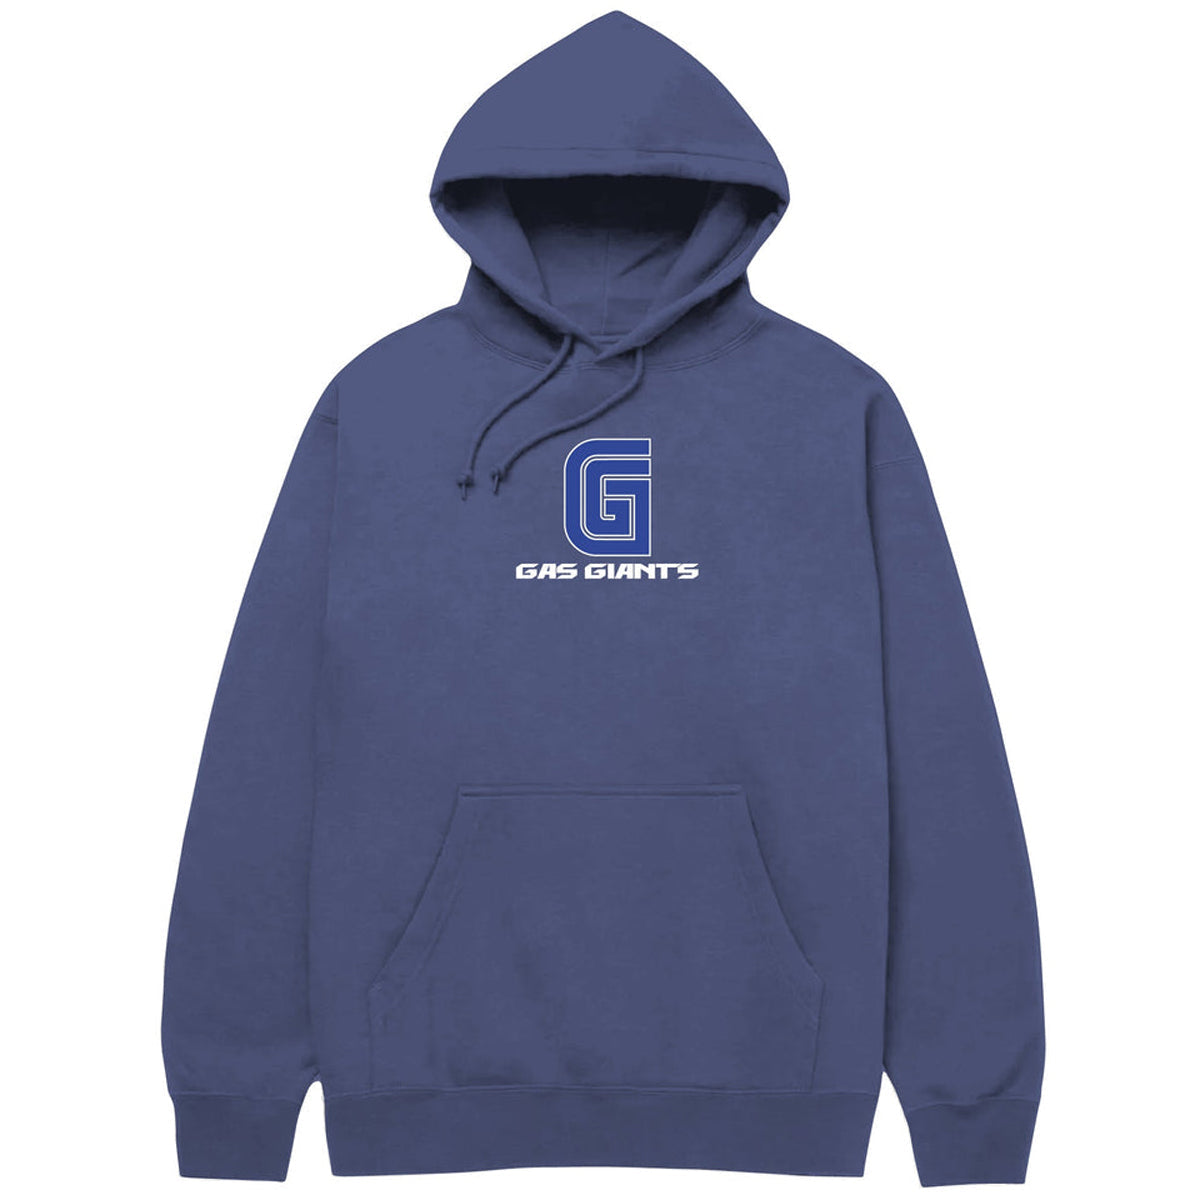 Gas Giants Saturn The Gas Giant Hoodie - Storm Blue image 2